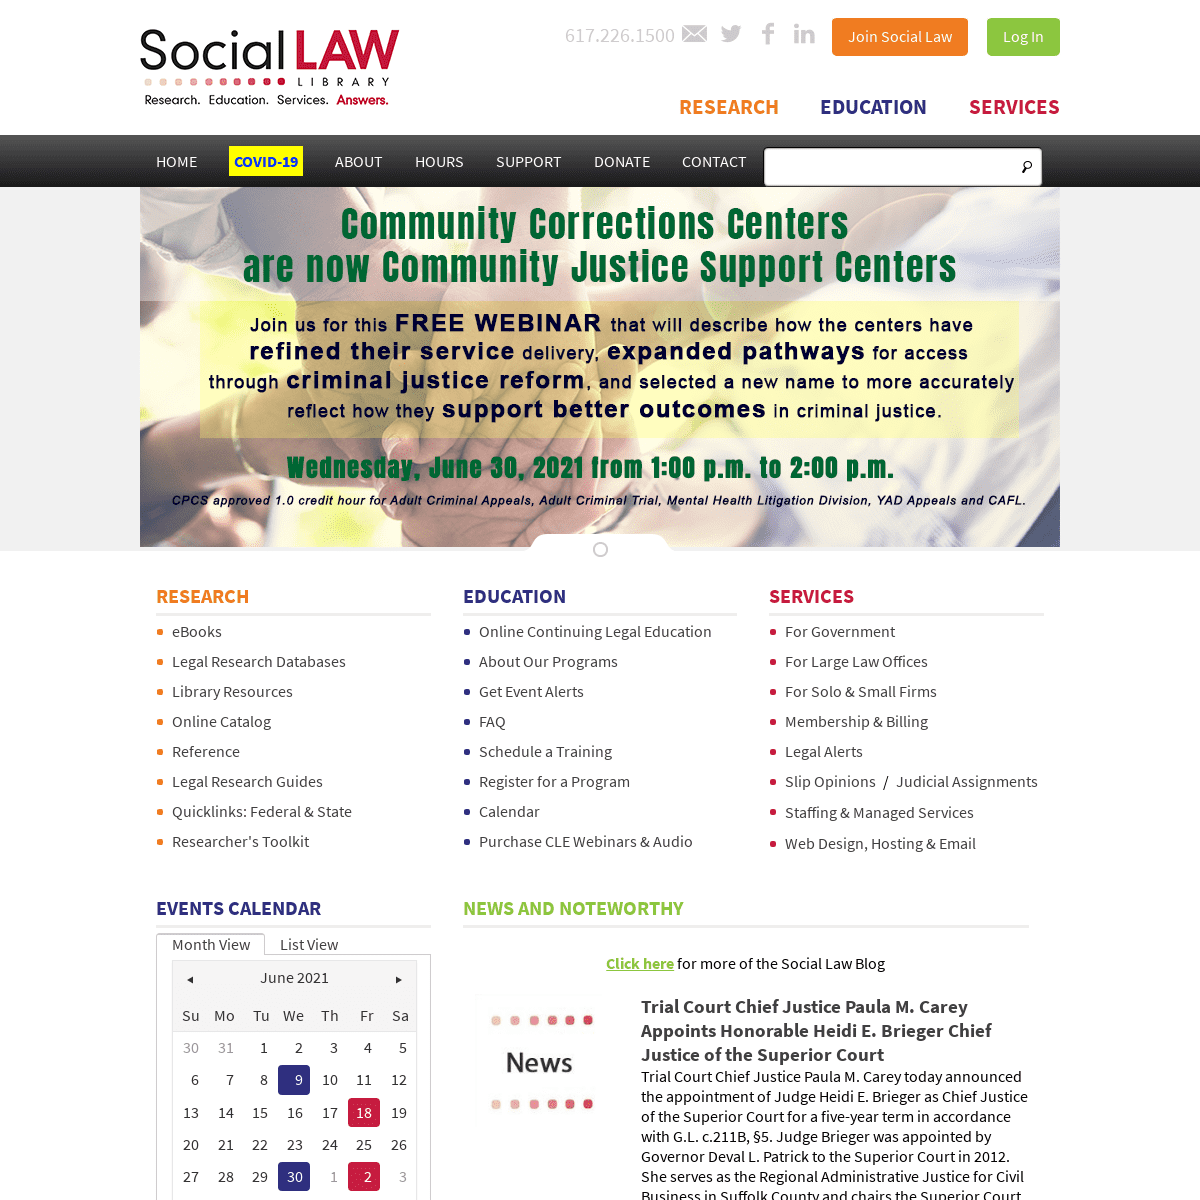 A complete backup of https://socialaw.com